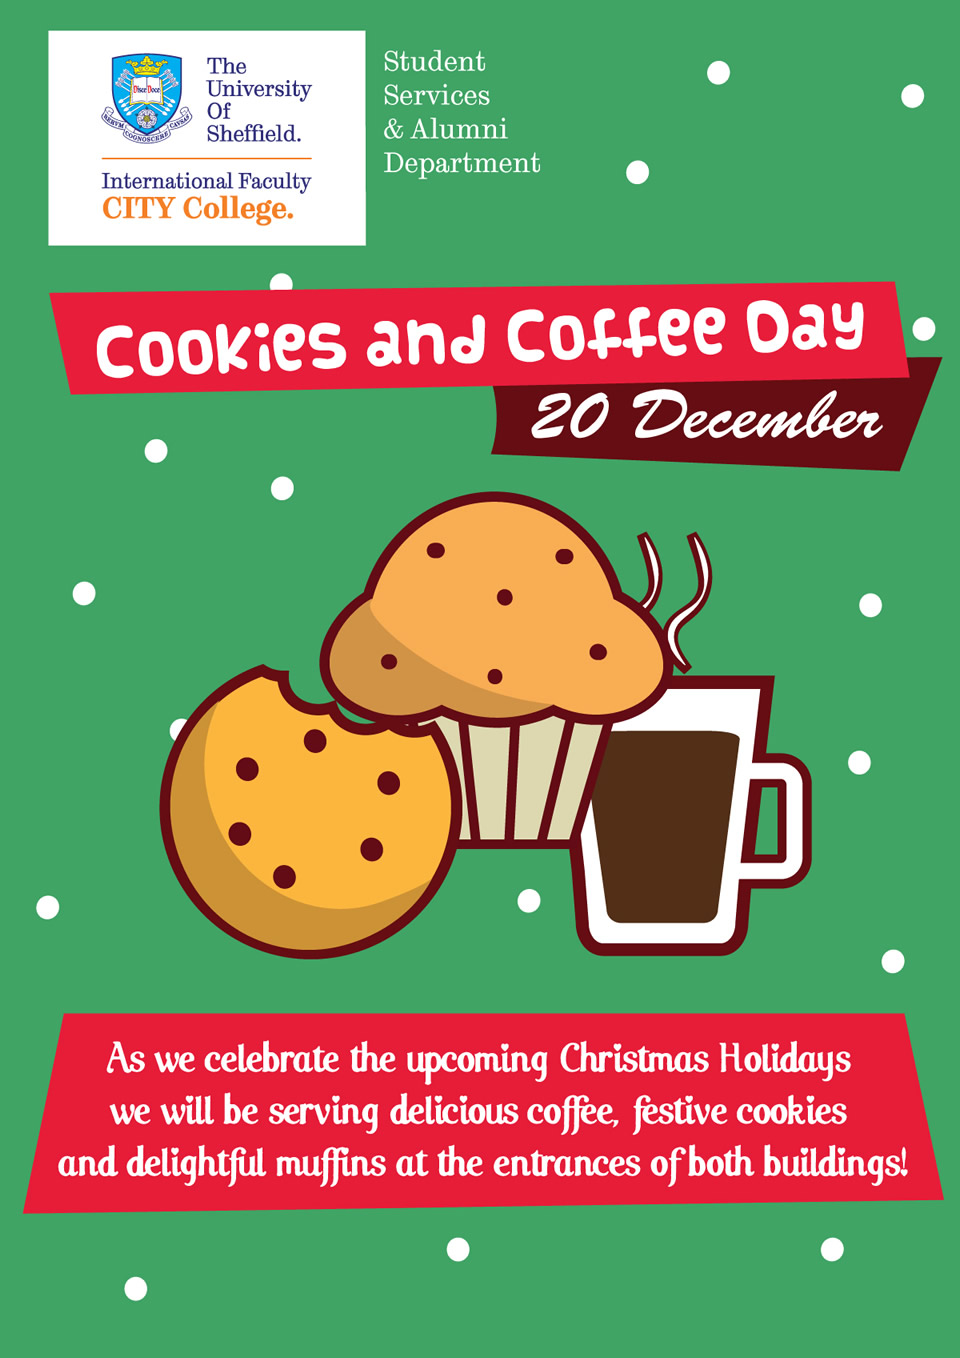 Cookies and Coffee Day 2018